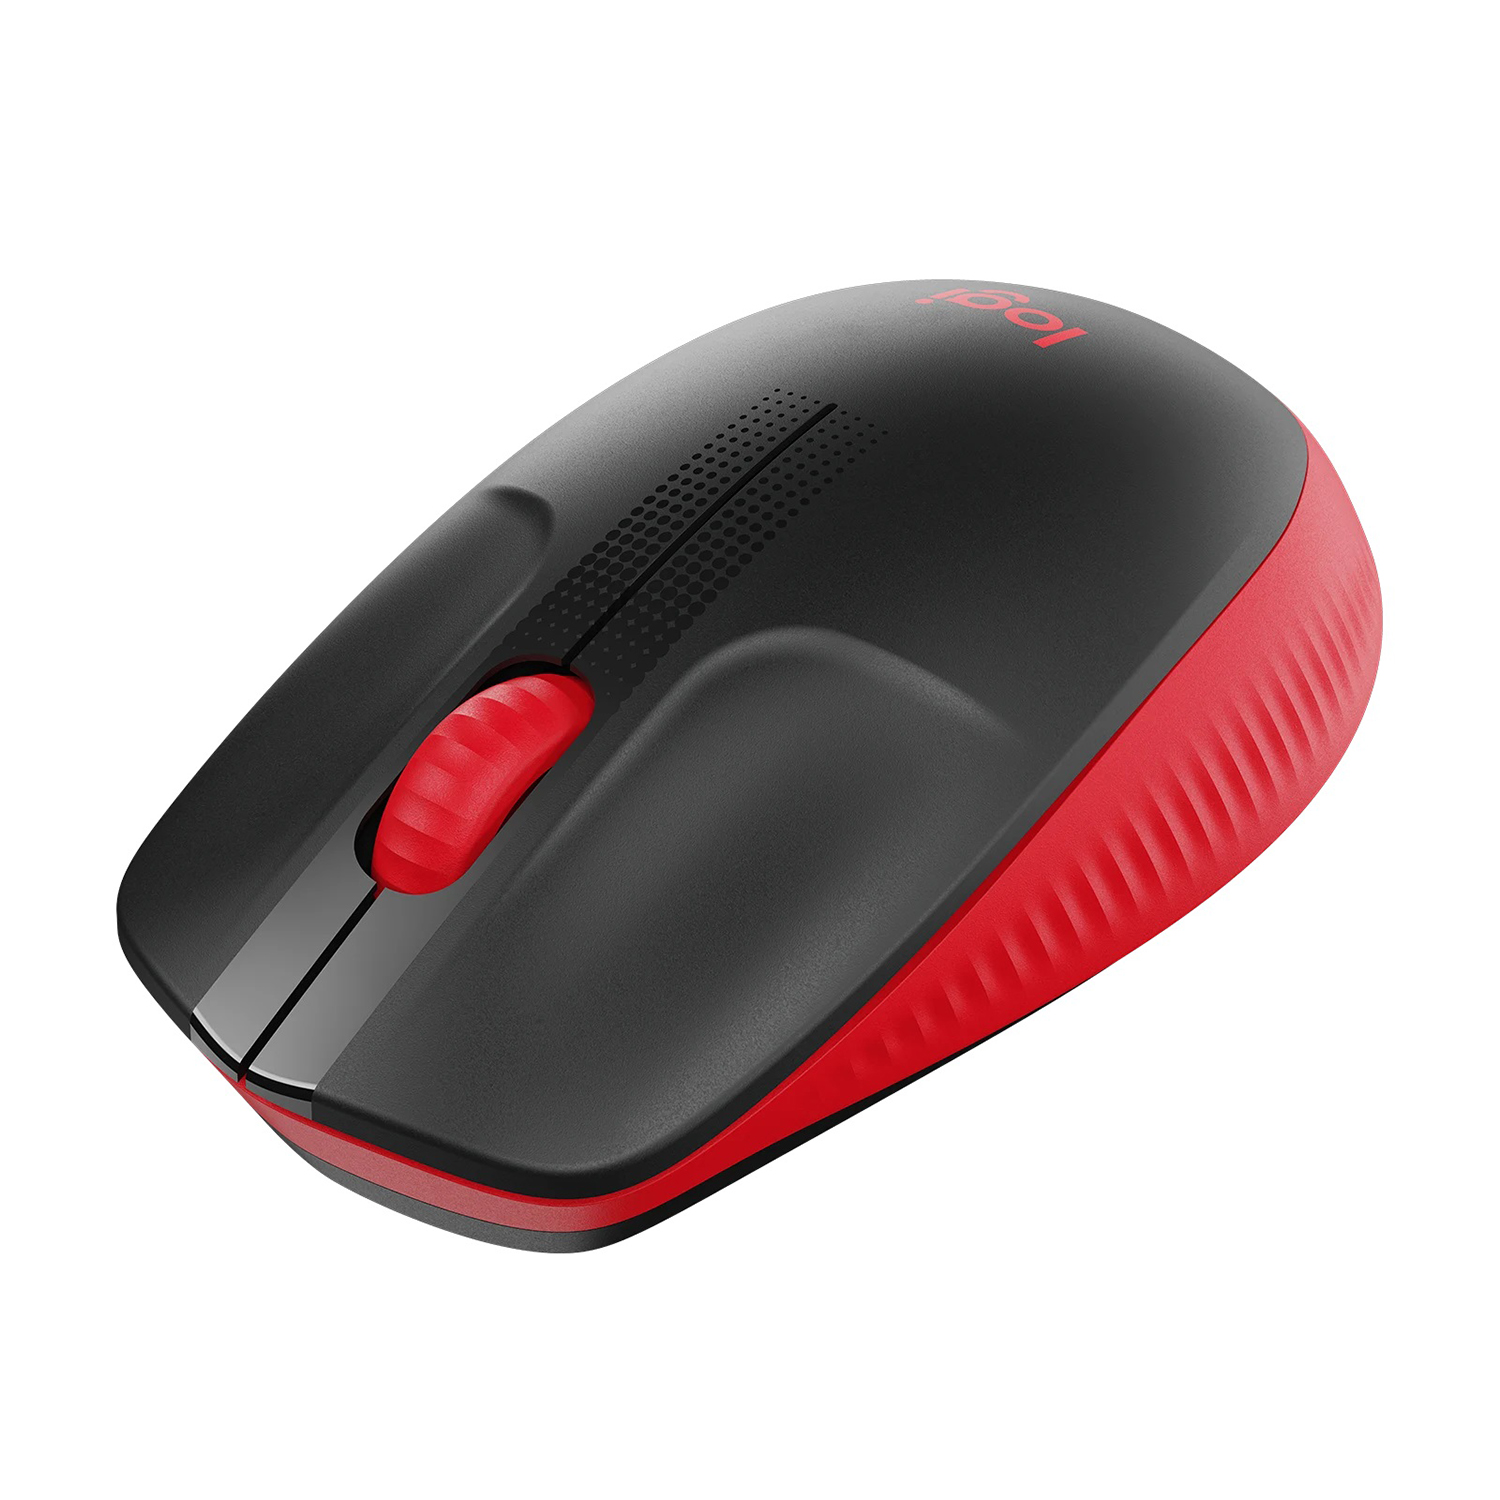 Logitech M190 Full Size Curve Design Wireless Mouse - Red